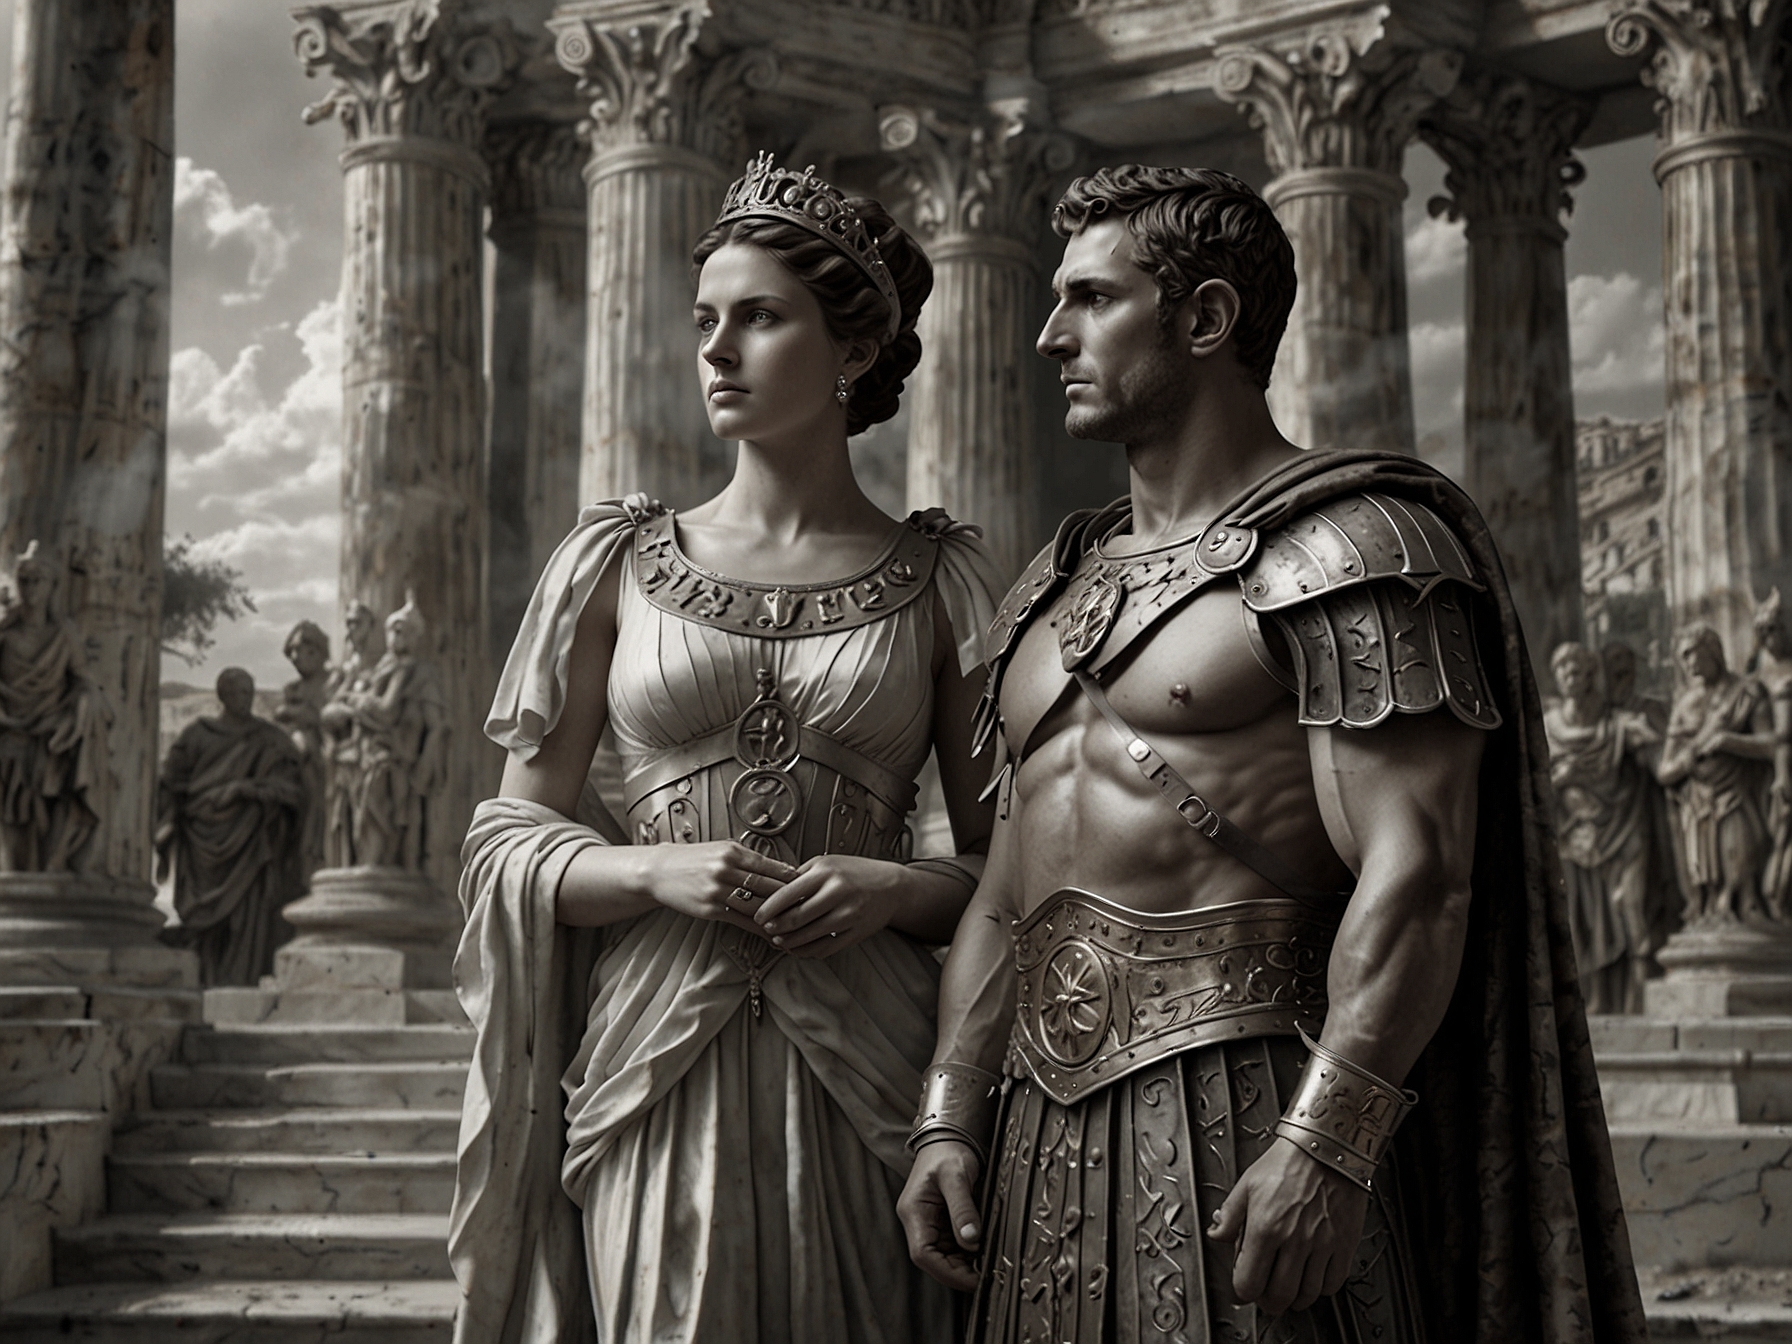 Depiction of a Roman emperor and empress in majestic attire, showcasing the grandeur of Roman names like Augustus and Aurelia, reflecting the aspirations of greatness and leadership.